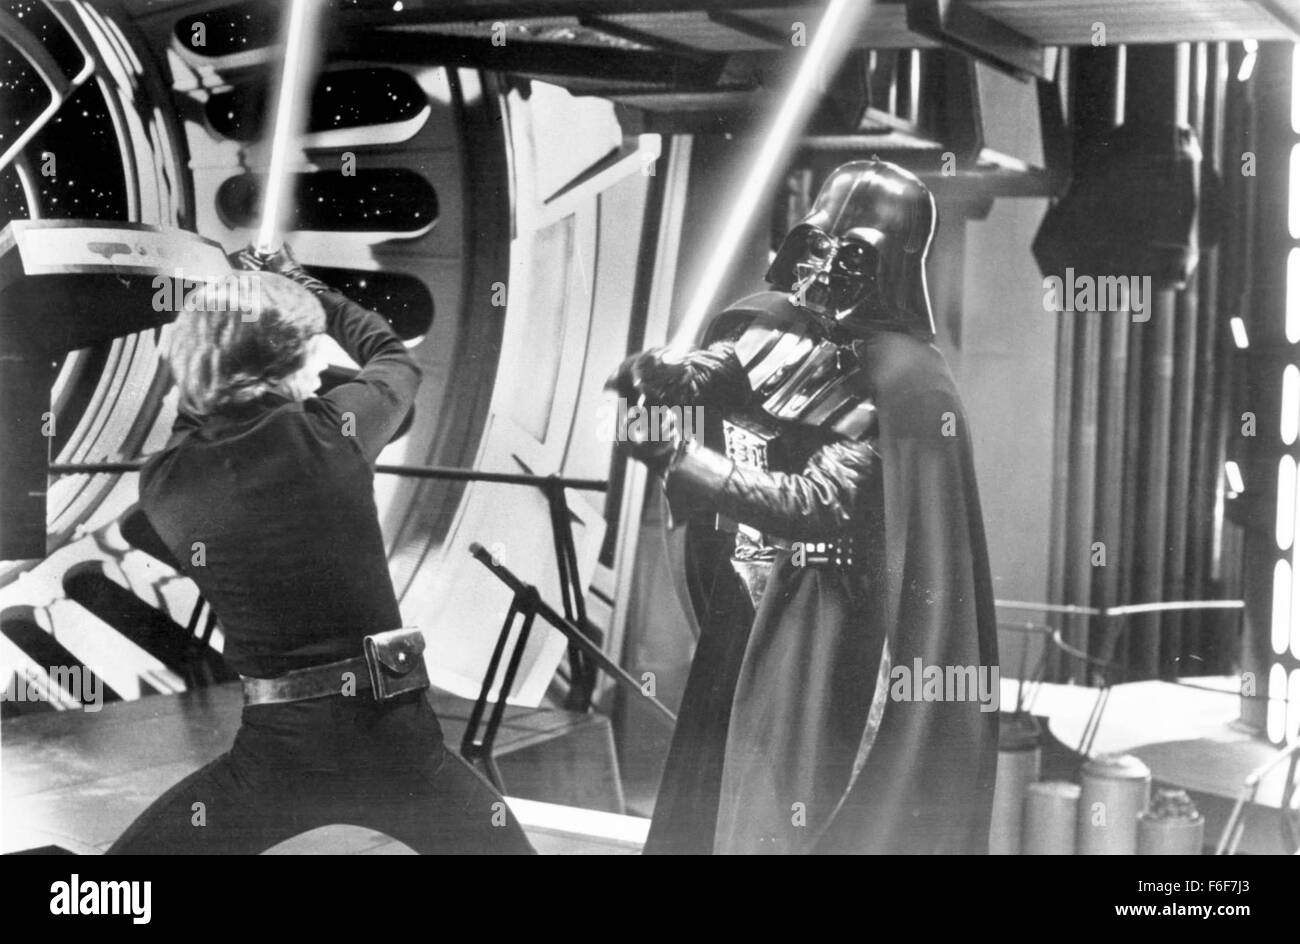 May 25, 1983; Hollywood, CA, USA; MARK HAMILL as Luke Skywalker dueling with DAVID PROWSE as Darth Vader in 1983 movie 'Return of the Jedi' directed by Richard Marquand. Stock Photo